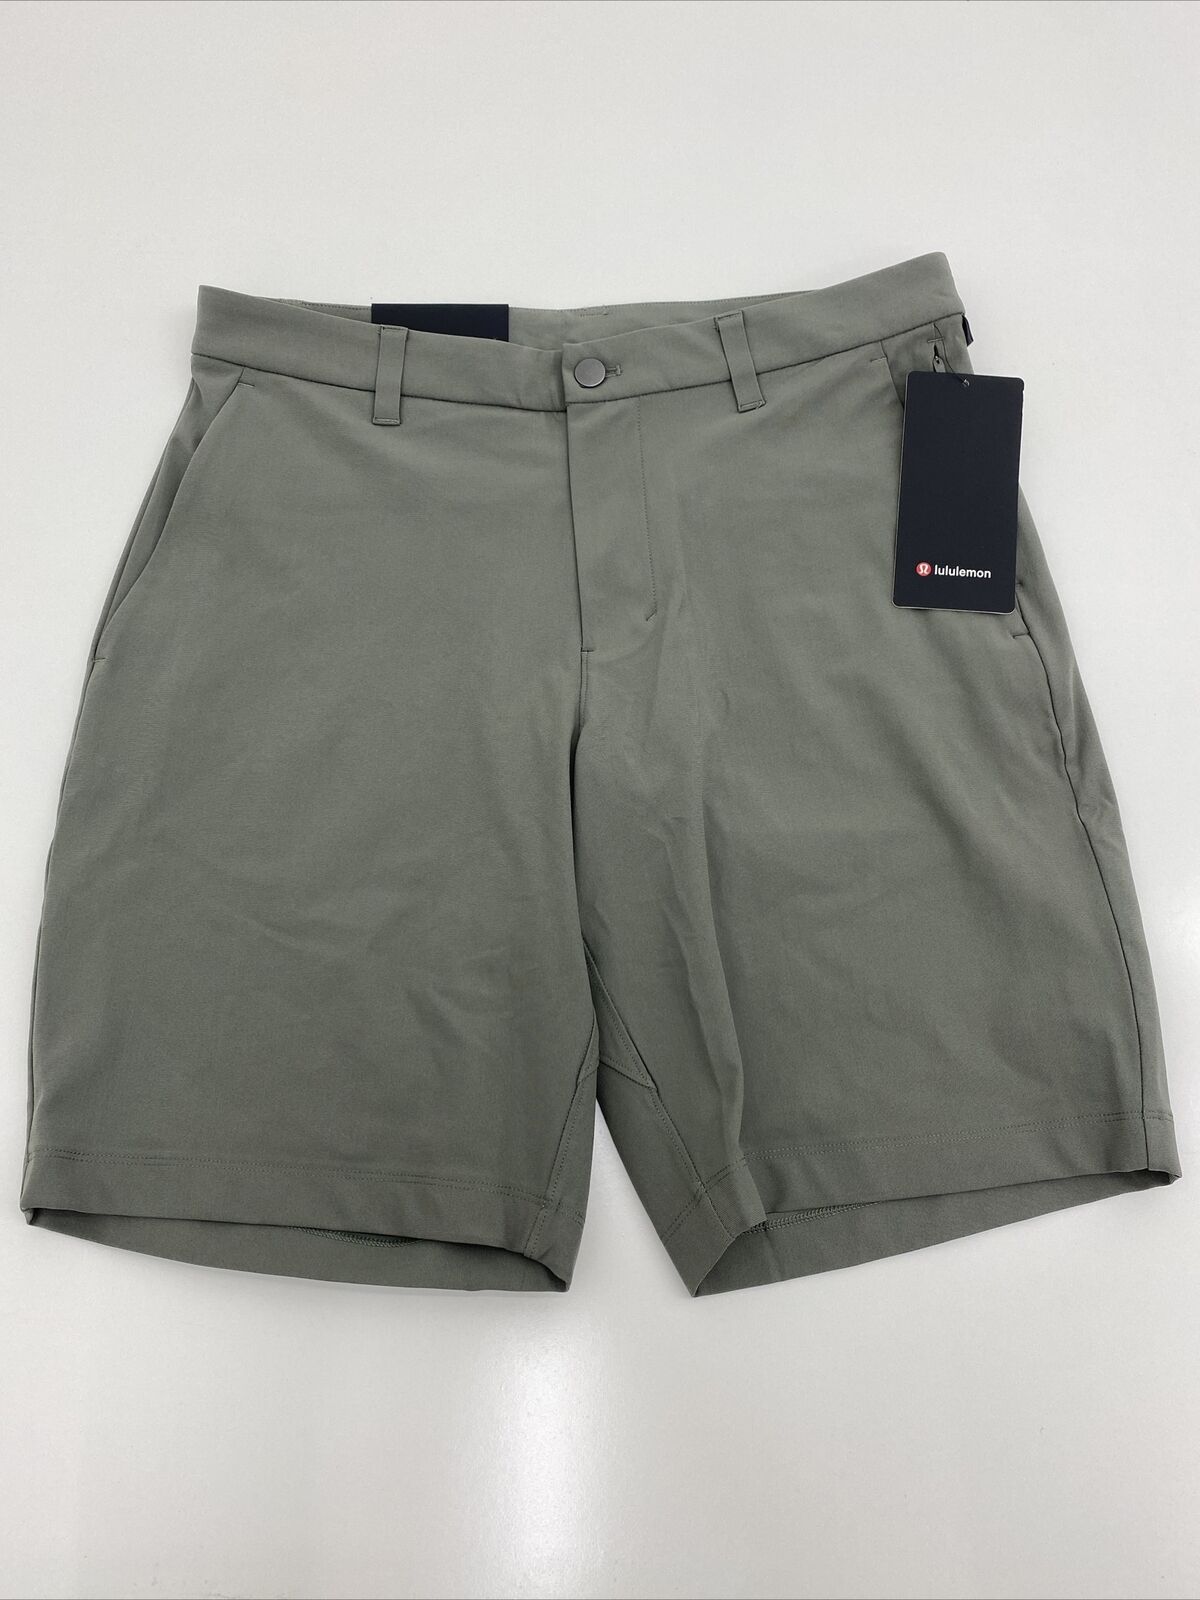 Lululemon Commission Classic-Fit Short 9" Gray Green Mens Size 32 New